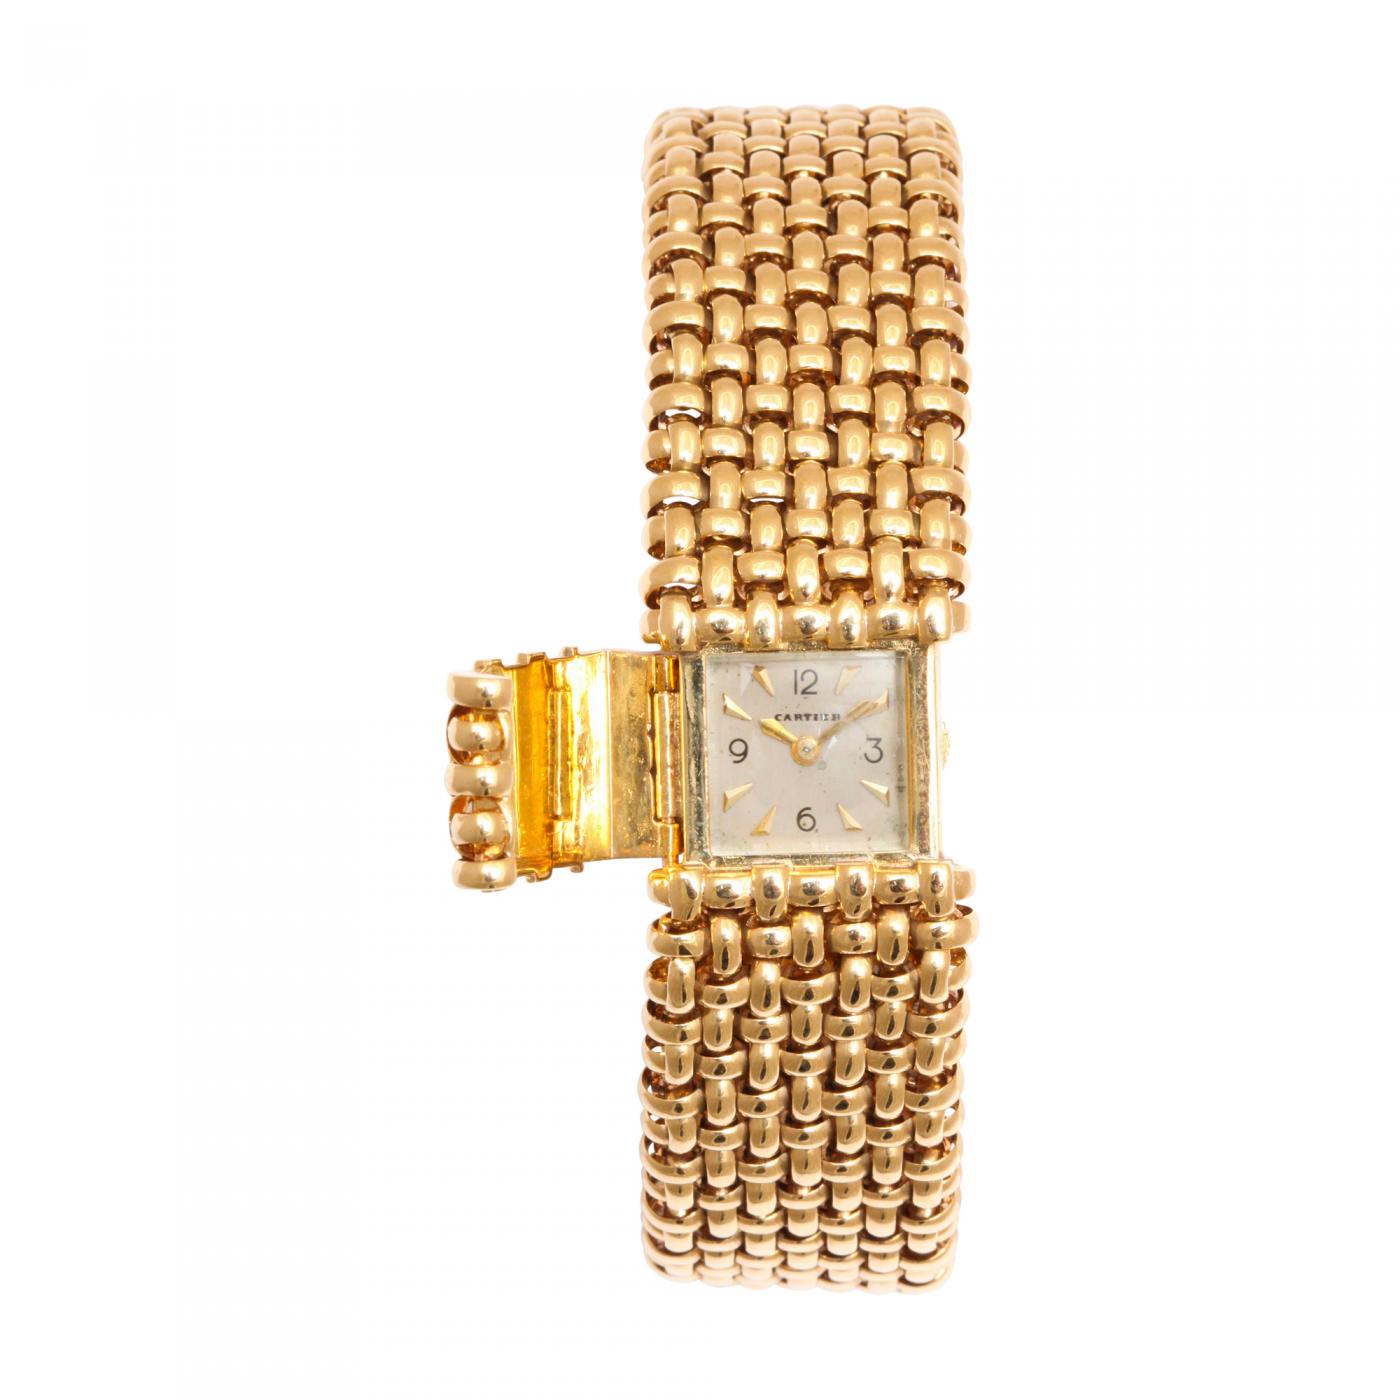 uberjewels Gold Plated Womens Watch Bracelet 12mm 12 mm Stainless Steel  Watch Strap Price in India  Buy uberjewels Gold Plated Womens Watch  Bracelet 12mm 12 mm Stainless Steel Watch Strap online